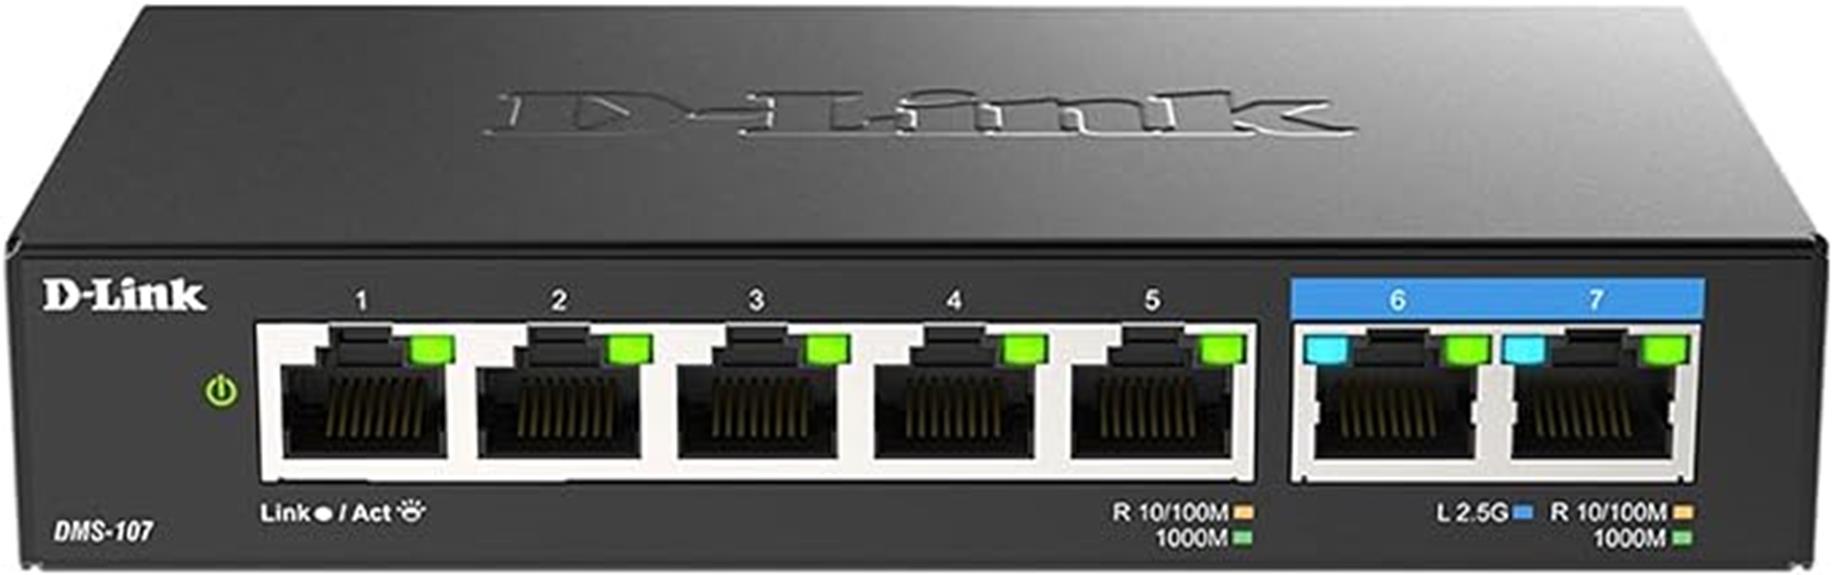 d link 7 port gaming switch